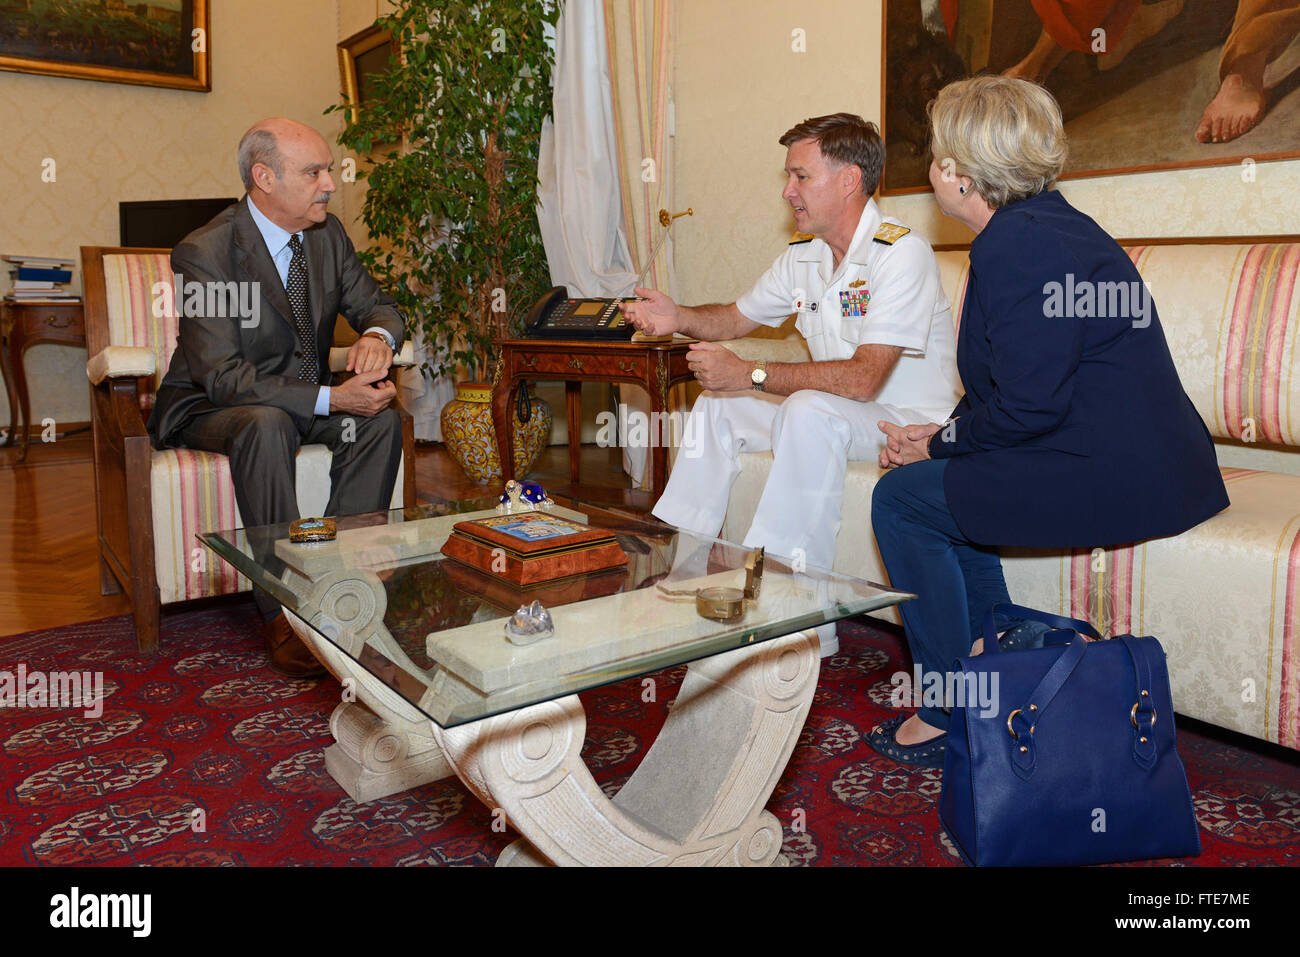 140723-N-AW206-036  NAPLES, Italy (July 23, 2014) - Commander, Allied Joint Force Command, Naples/Commander, U.S. Naval Forces Europe-Africa, Adm. Mark Ferguson, center, meets with the Prefect of Naples, Dr. H.E. Francesco Antonio Musolino, left. Ferguson expressed his appreciation to the people of Naples for their support, and reiterated his commitment to strengthening the relationship with the Naples community. (U.S. Navy photo by Mass Communication Specialist 2nd Class Jacob D. Moore/Released) Stock Photo